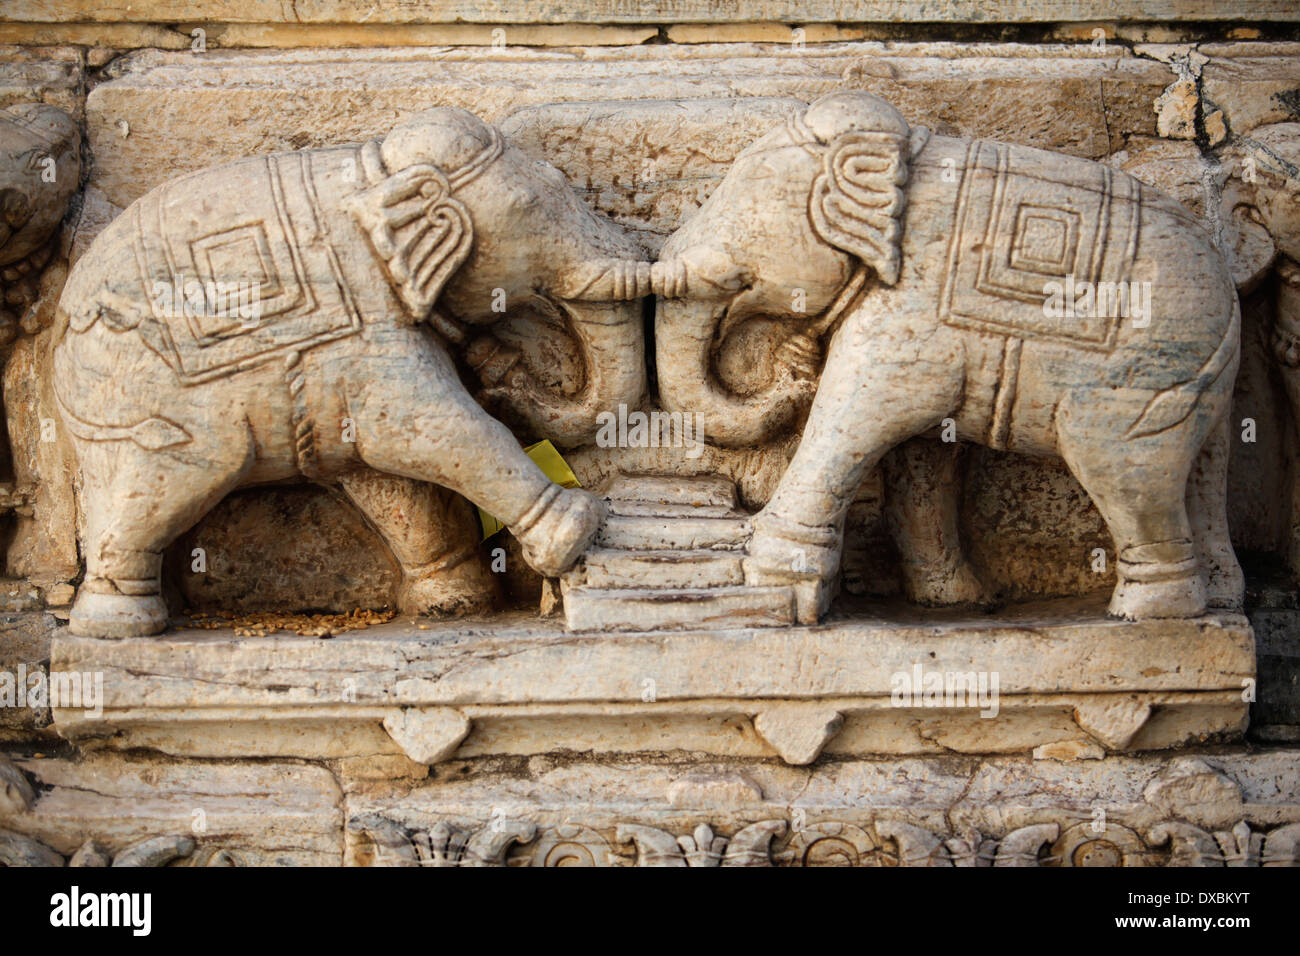 Detail of elephants carved in the stone inside the 'Udaipur Fort'. Rajasthan, India. Stock Photo